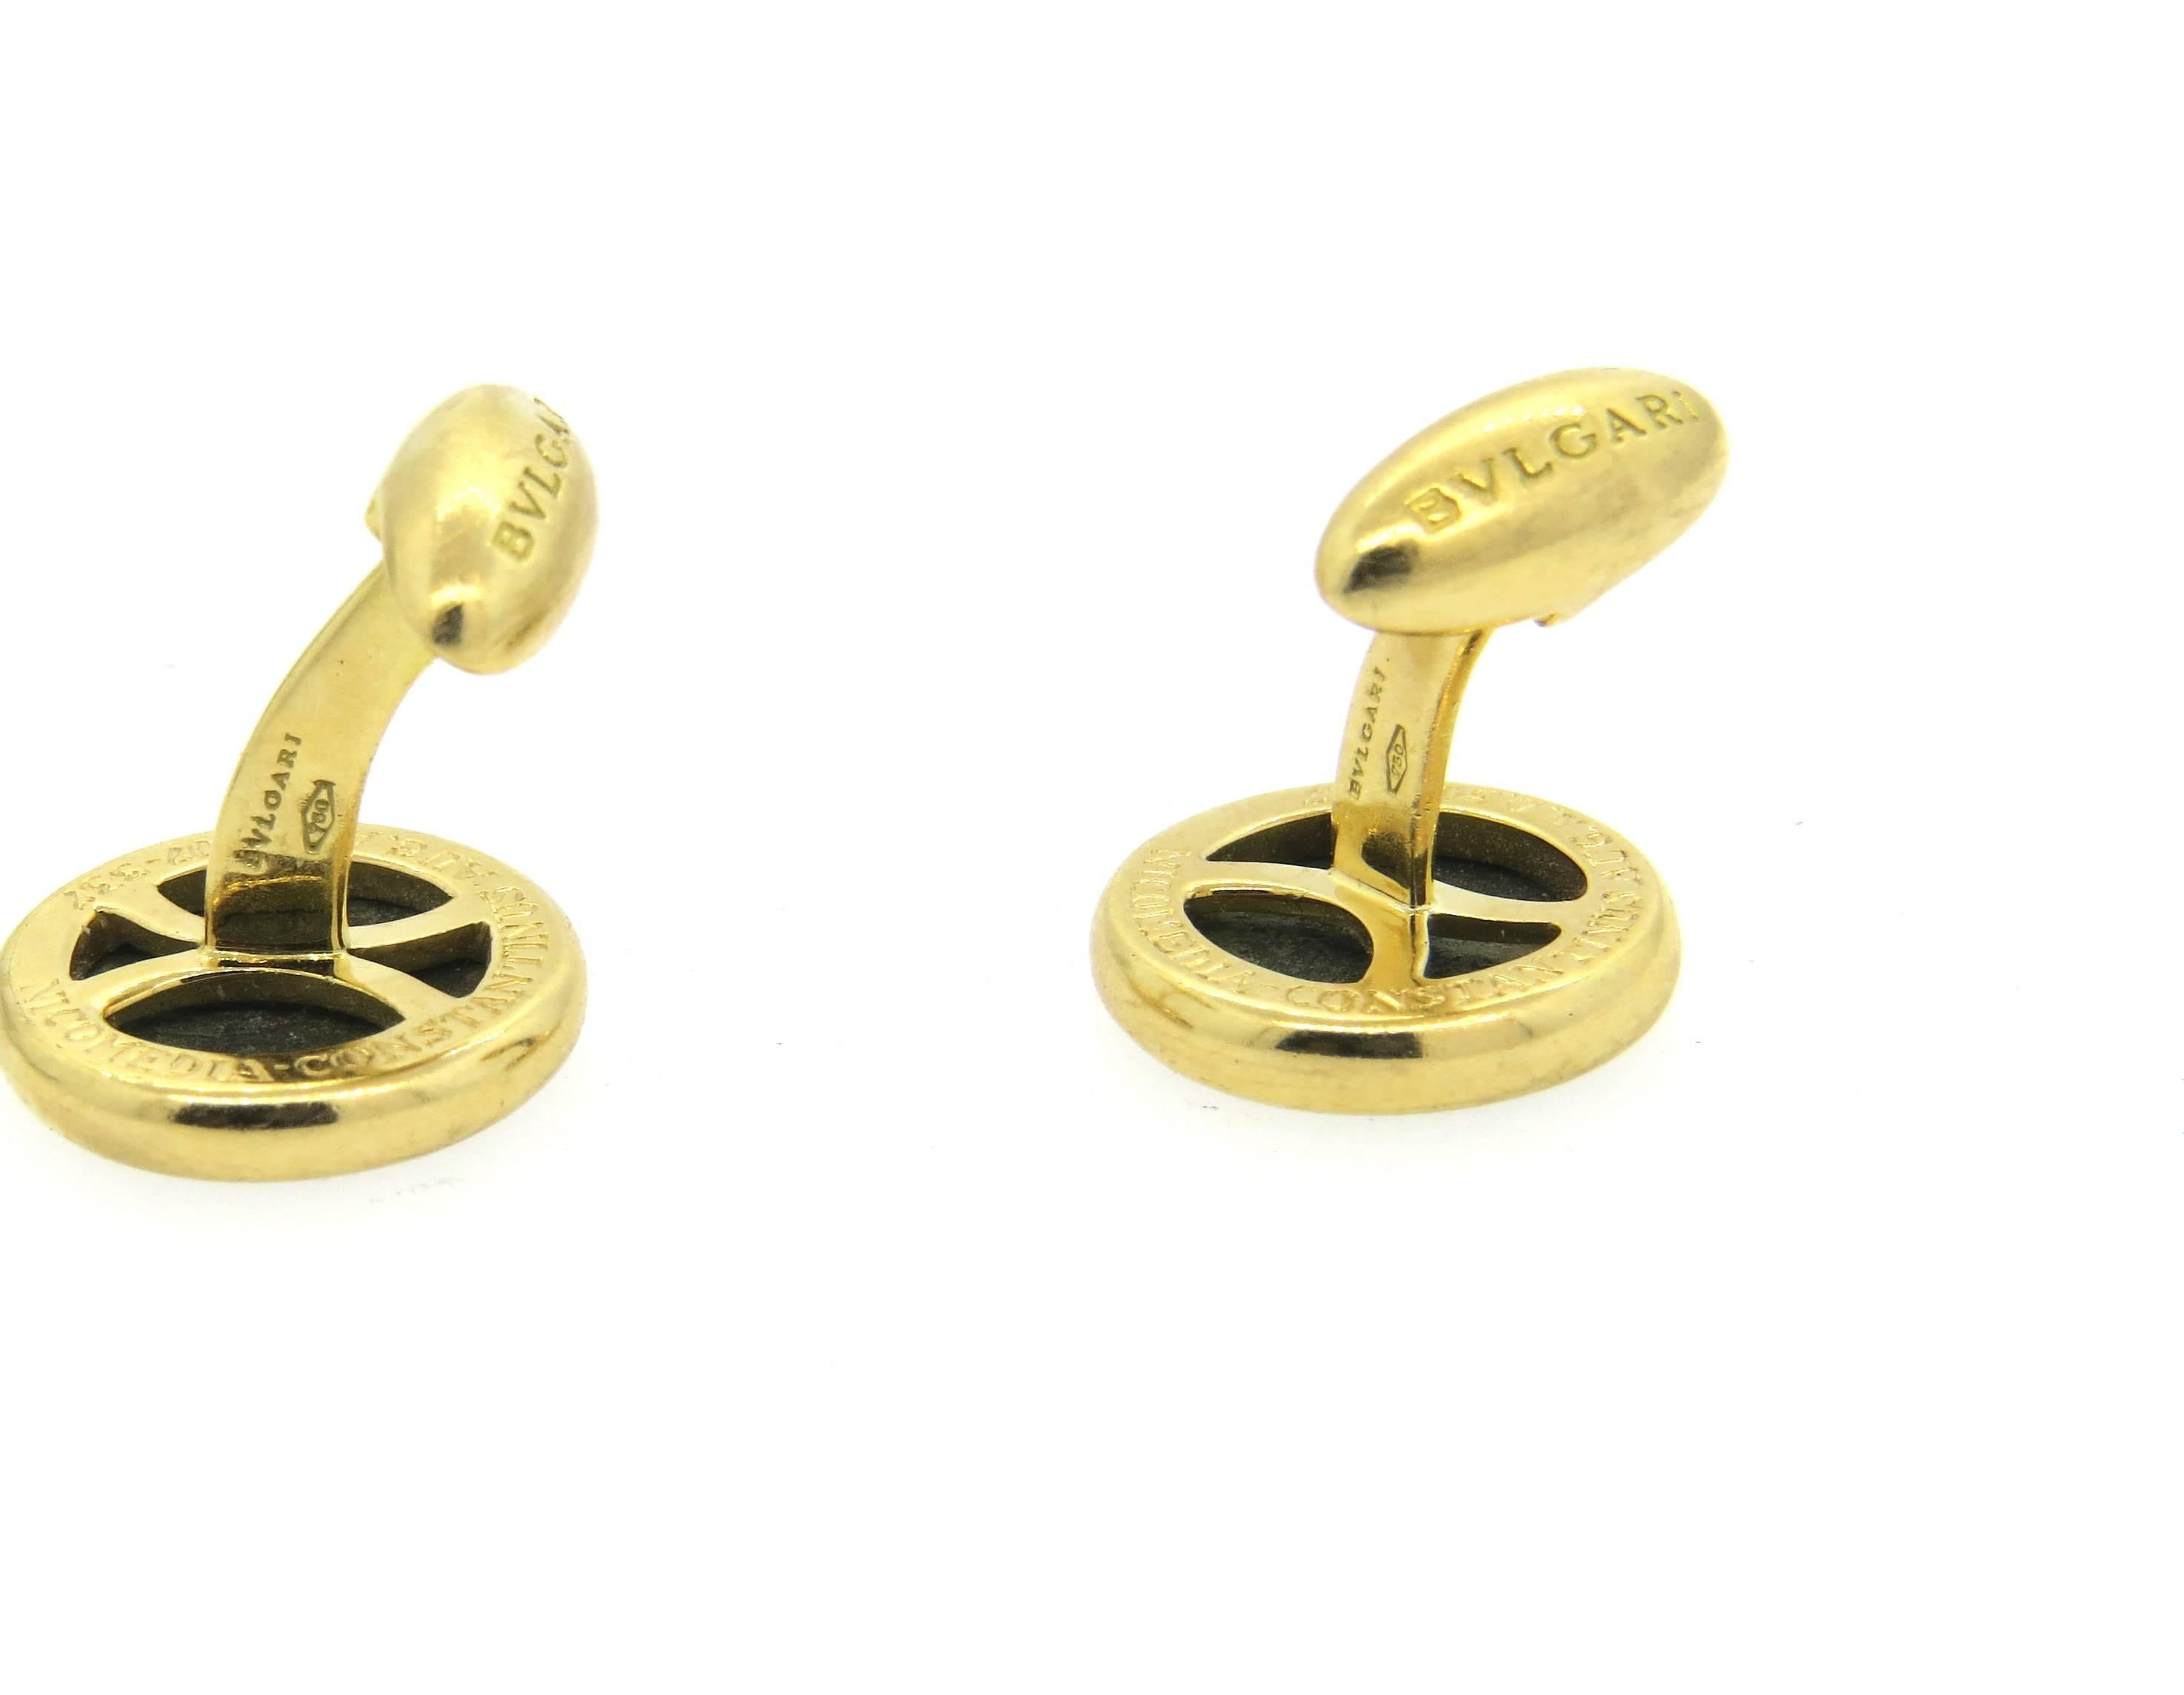 Pair of large 18k yellow gold cufflinks, crafted by Bulgari, set with 15mm ancient coins. Cufflink top measures 19mm in diameter. Marked Bvlgari, made in Italy,750, Nicomedia-Constantinus, Aug. A.D.307-337. Weight - 23.7 grams